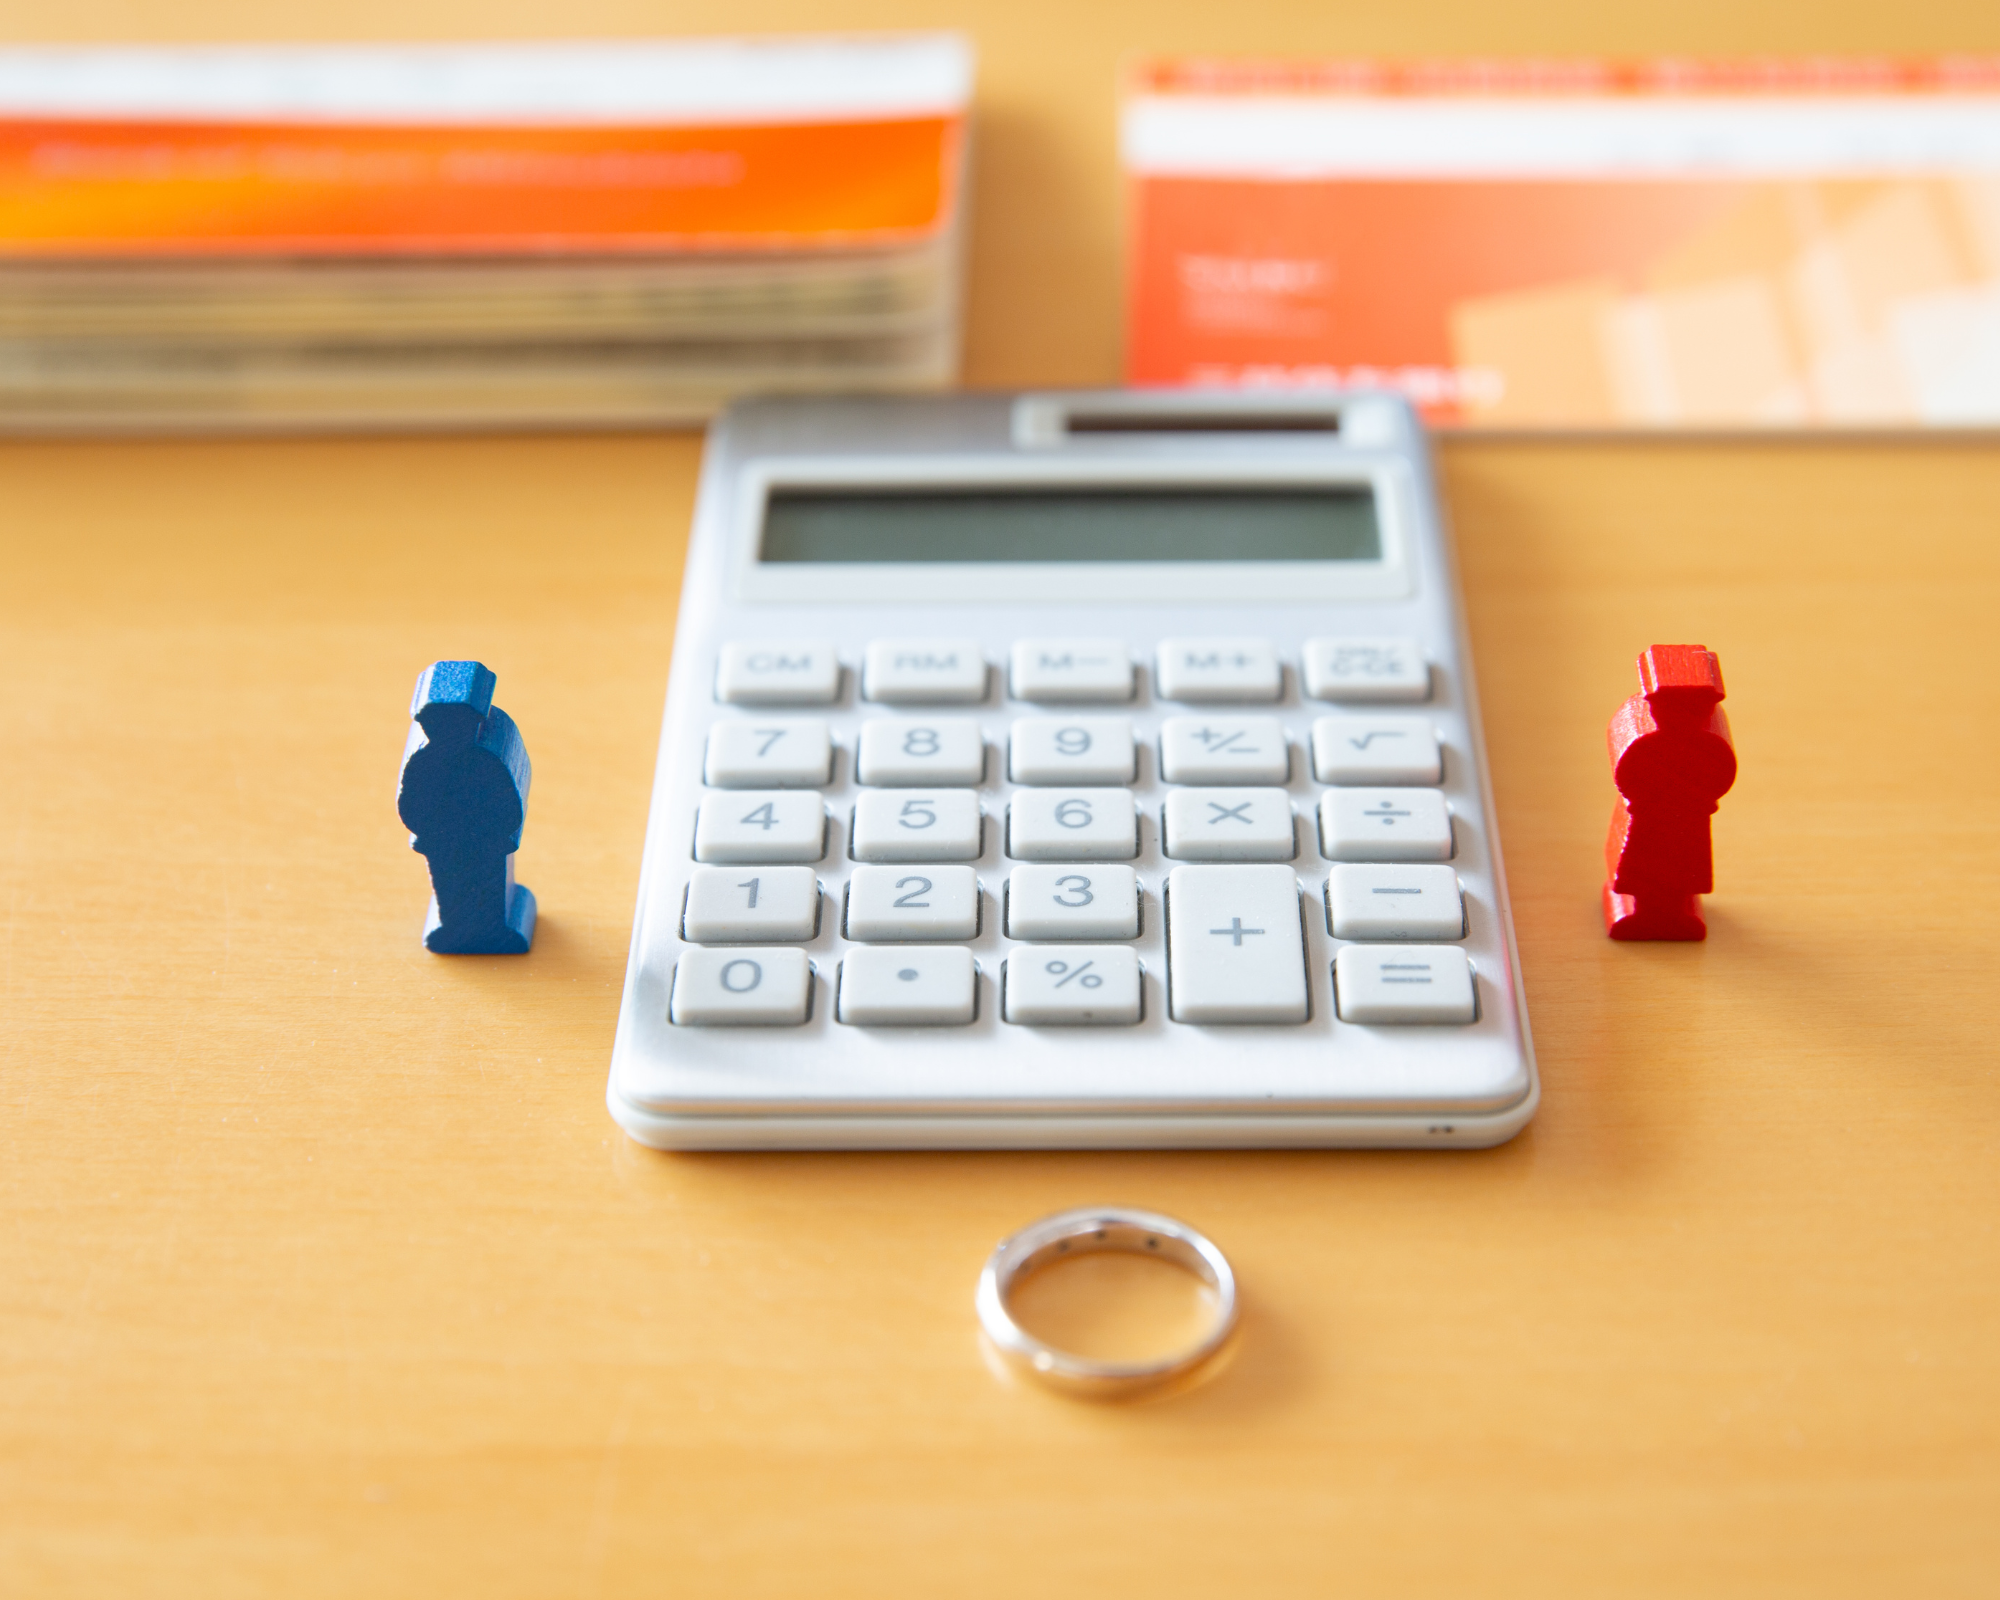 Divorcees In Danger Of Losing Personal Assets Without Proper Legal Protection